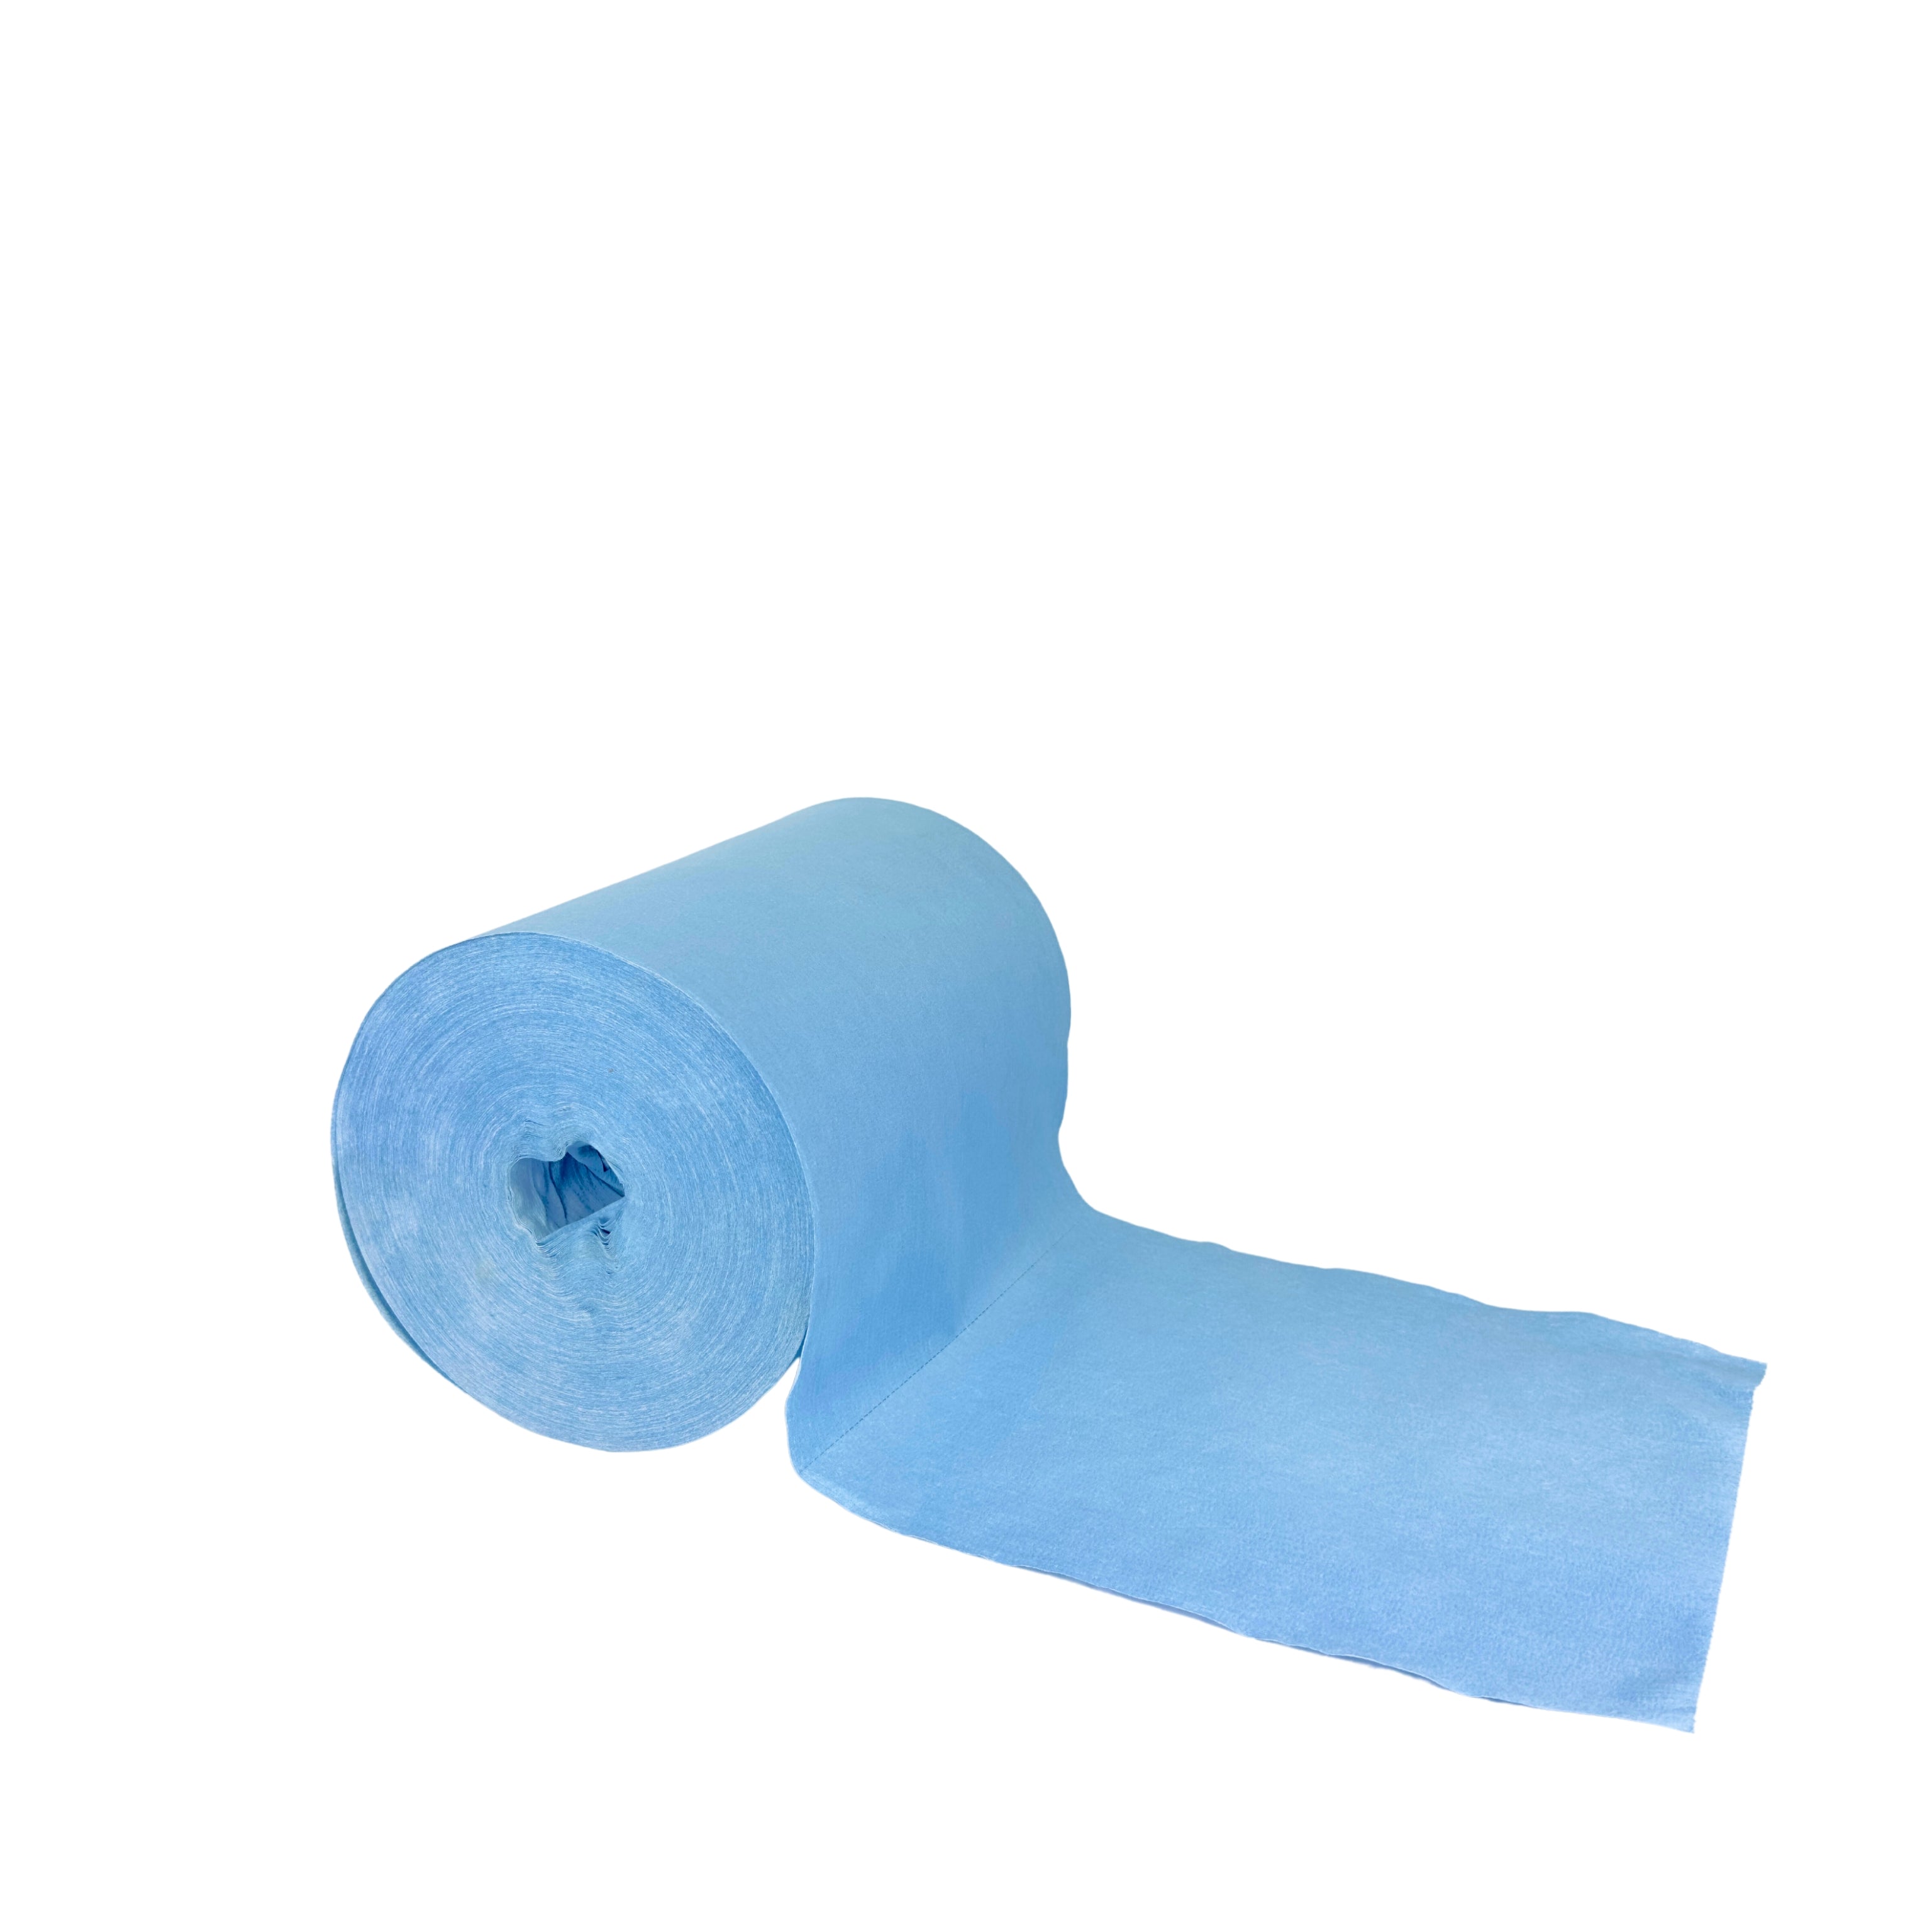 Blue Spunlace Shop Towels Perforated Roll Telesto Products